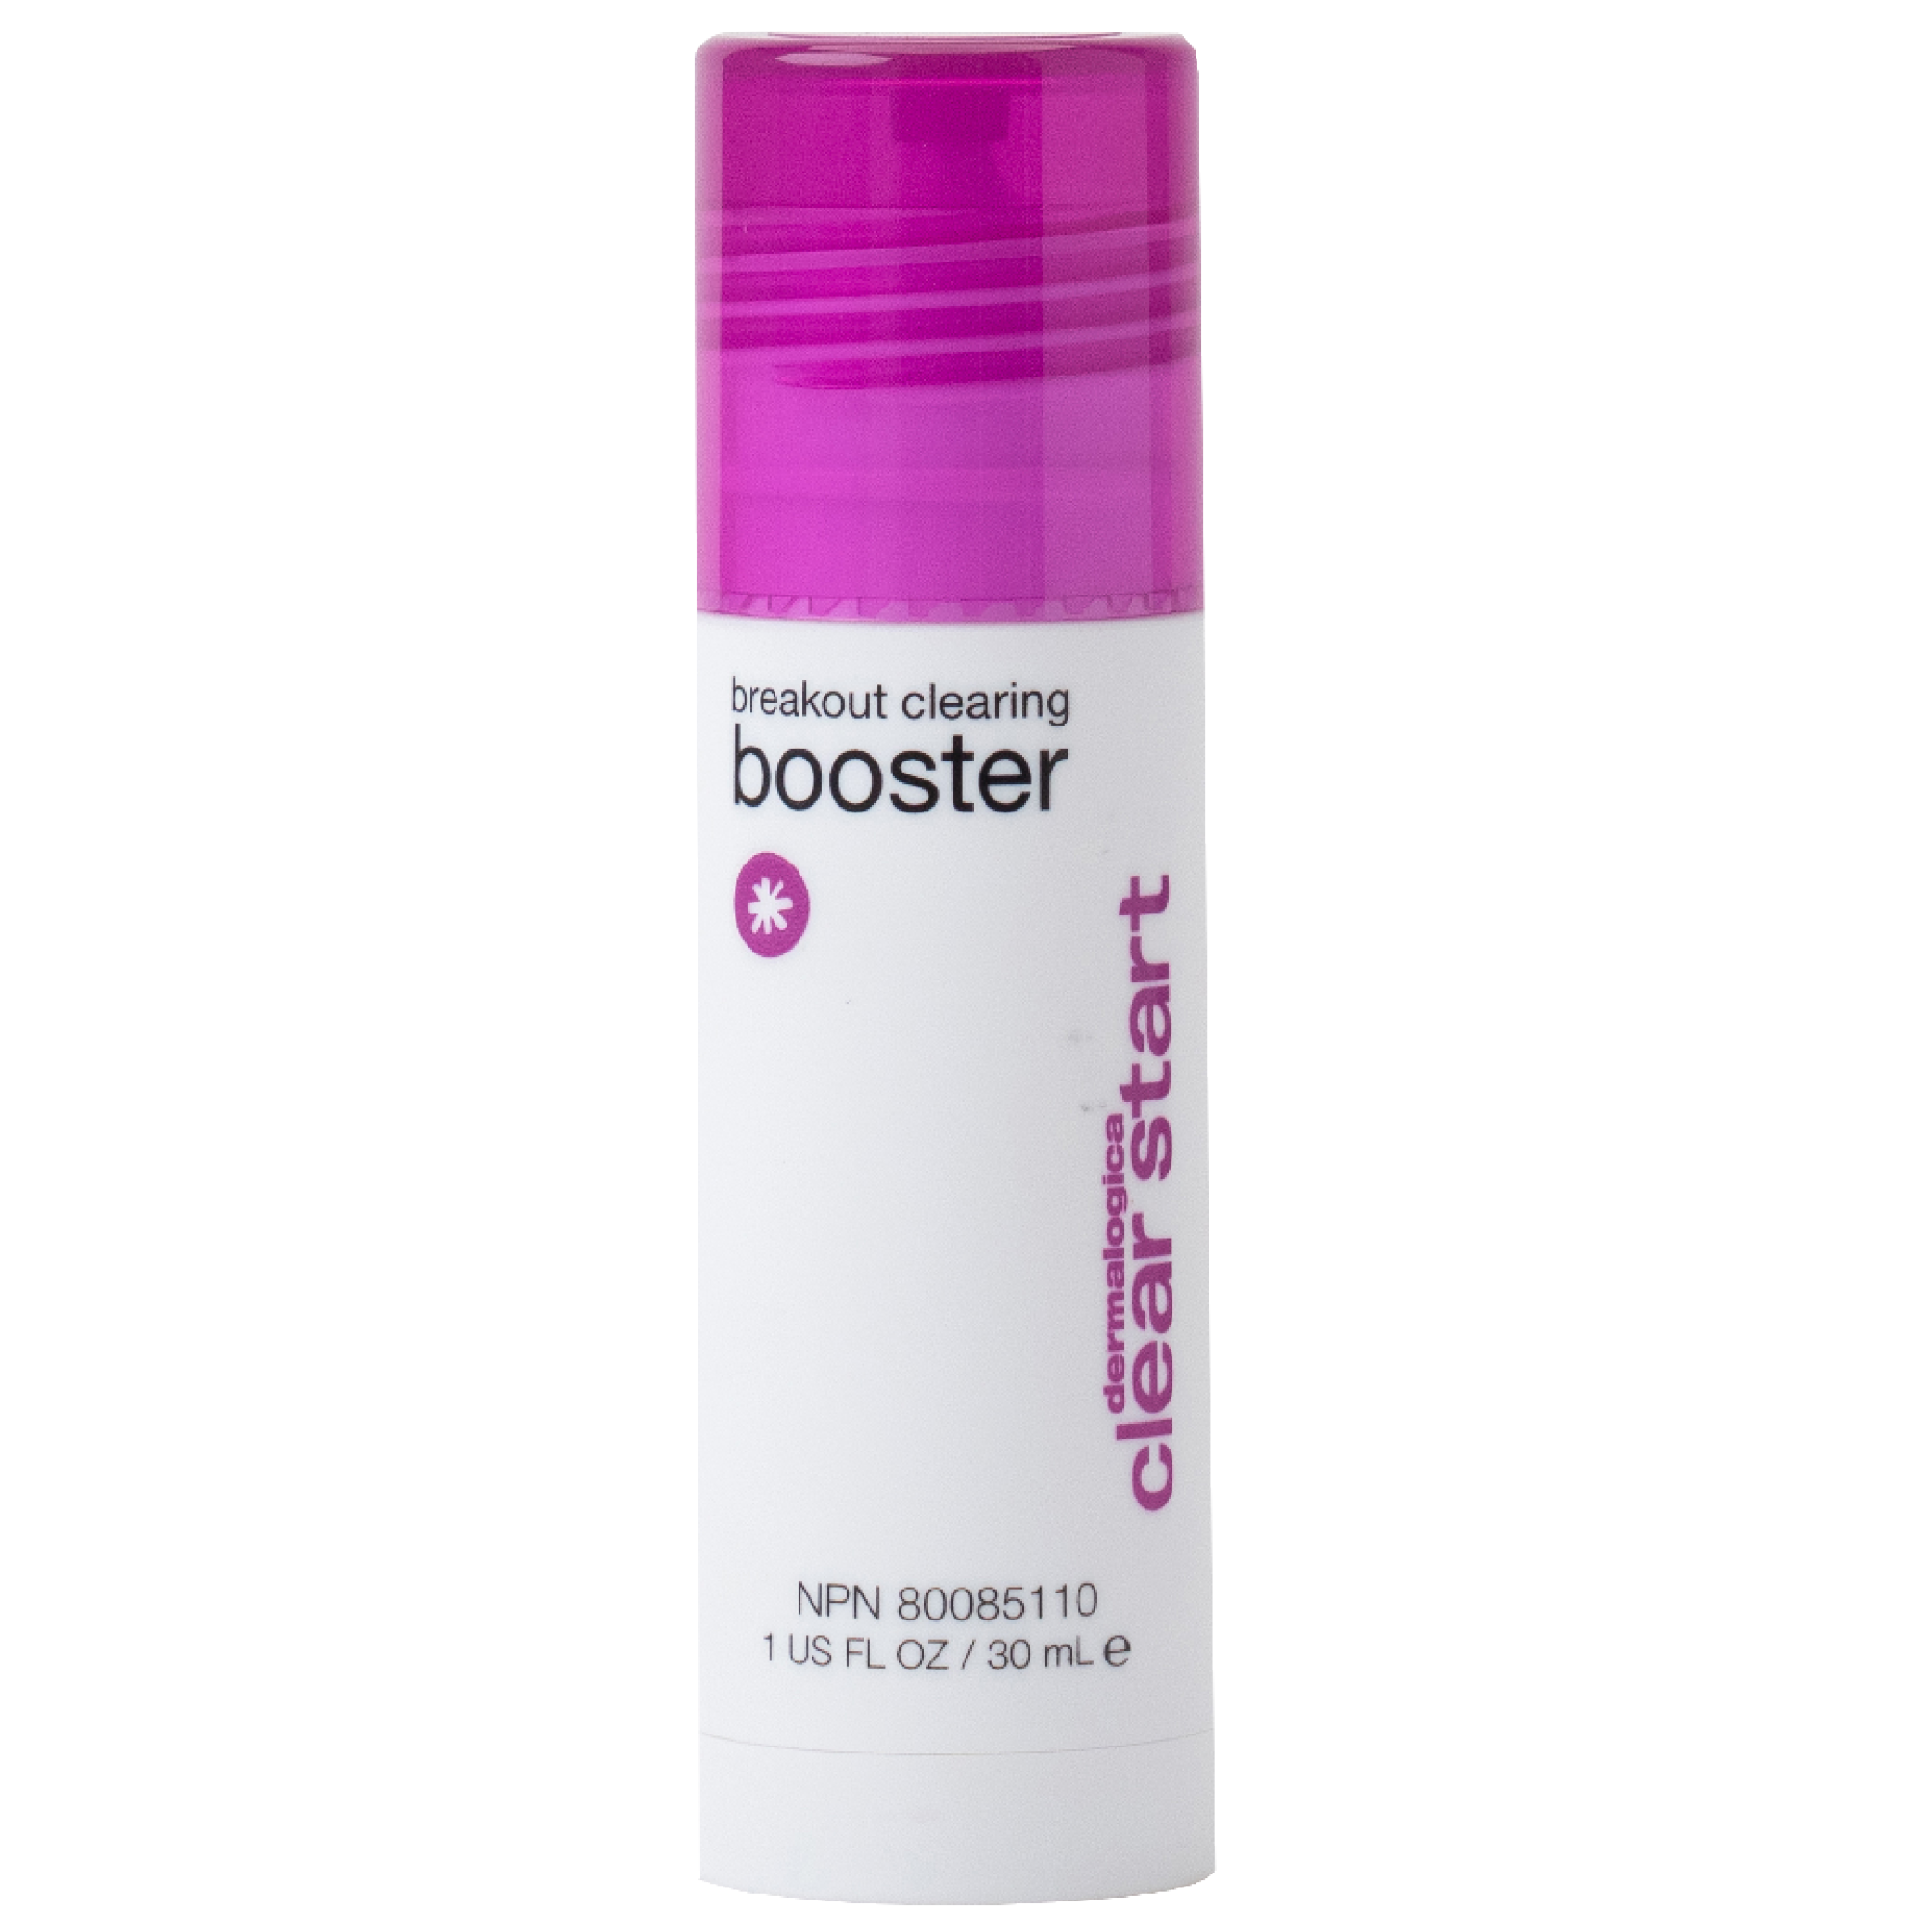 Clear Start Breakout Clearing Booster, 30 ml